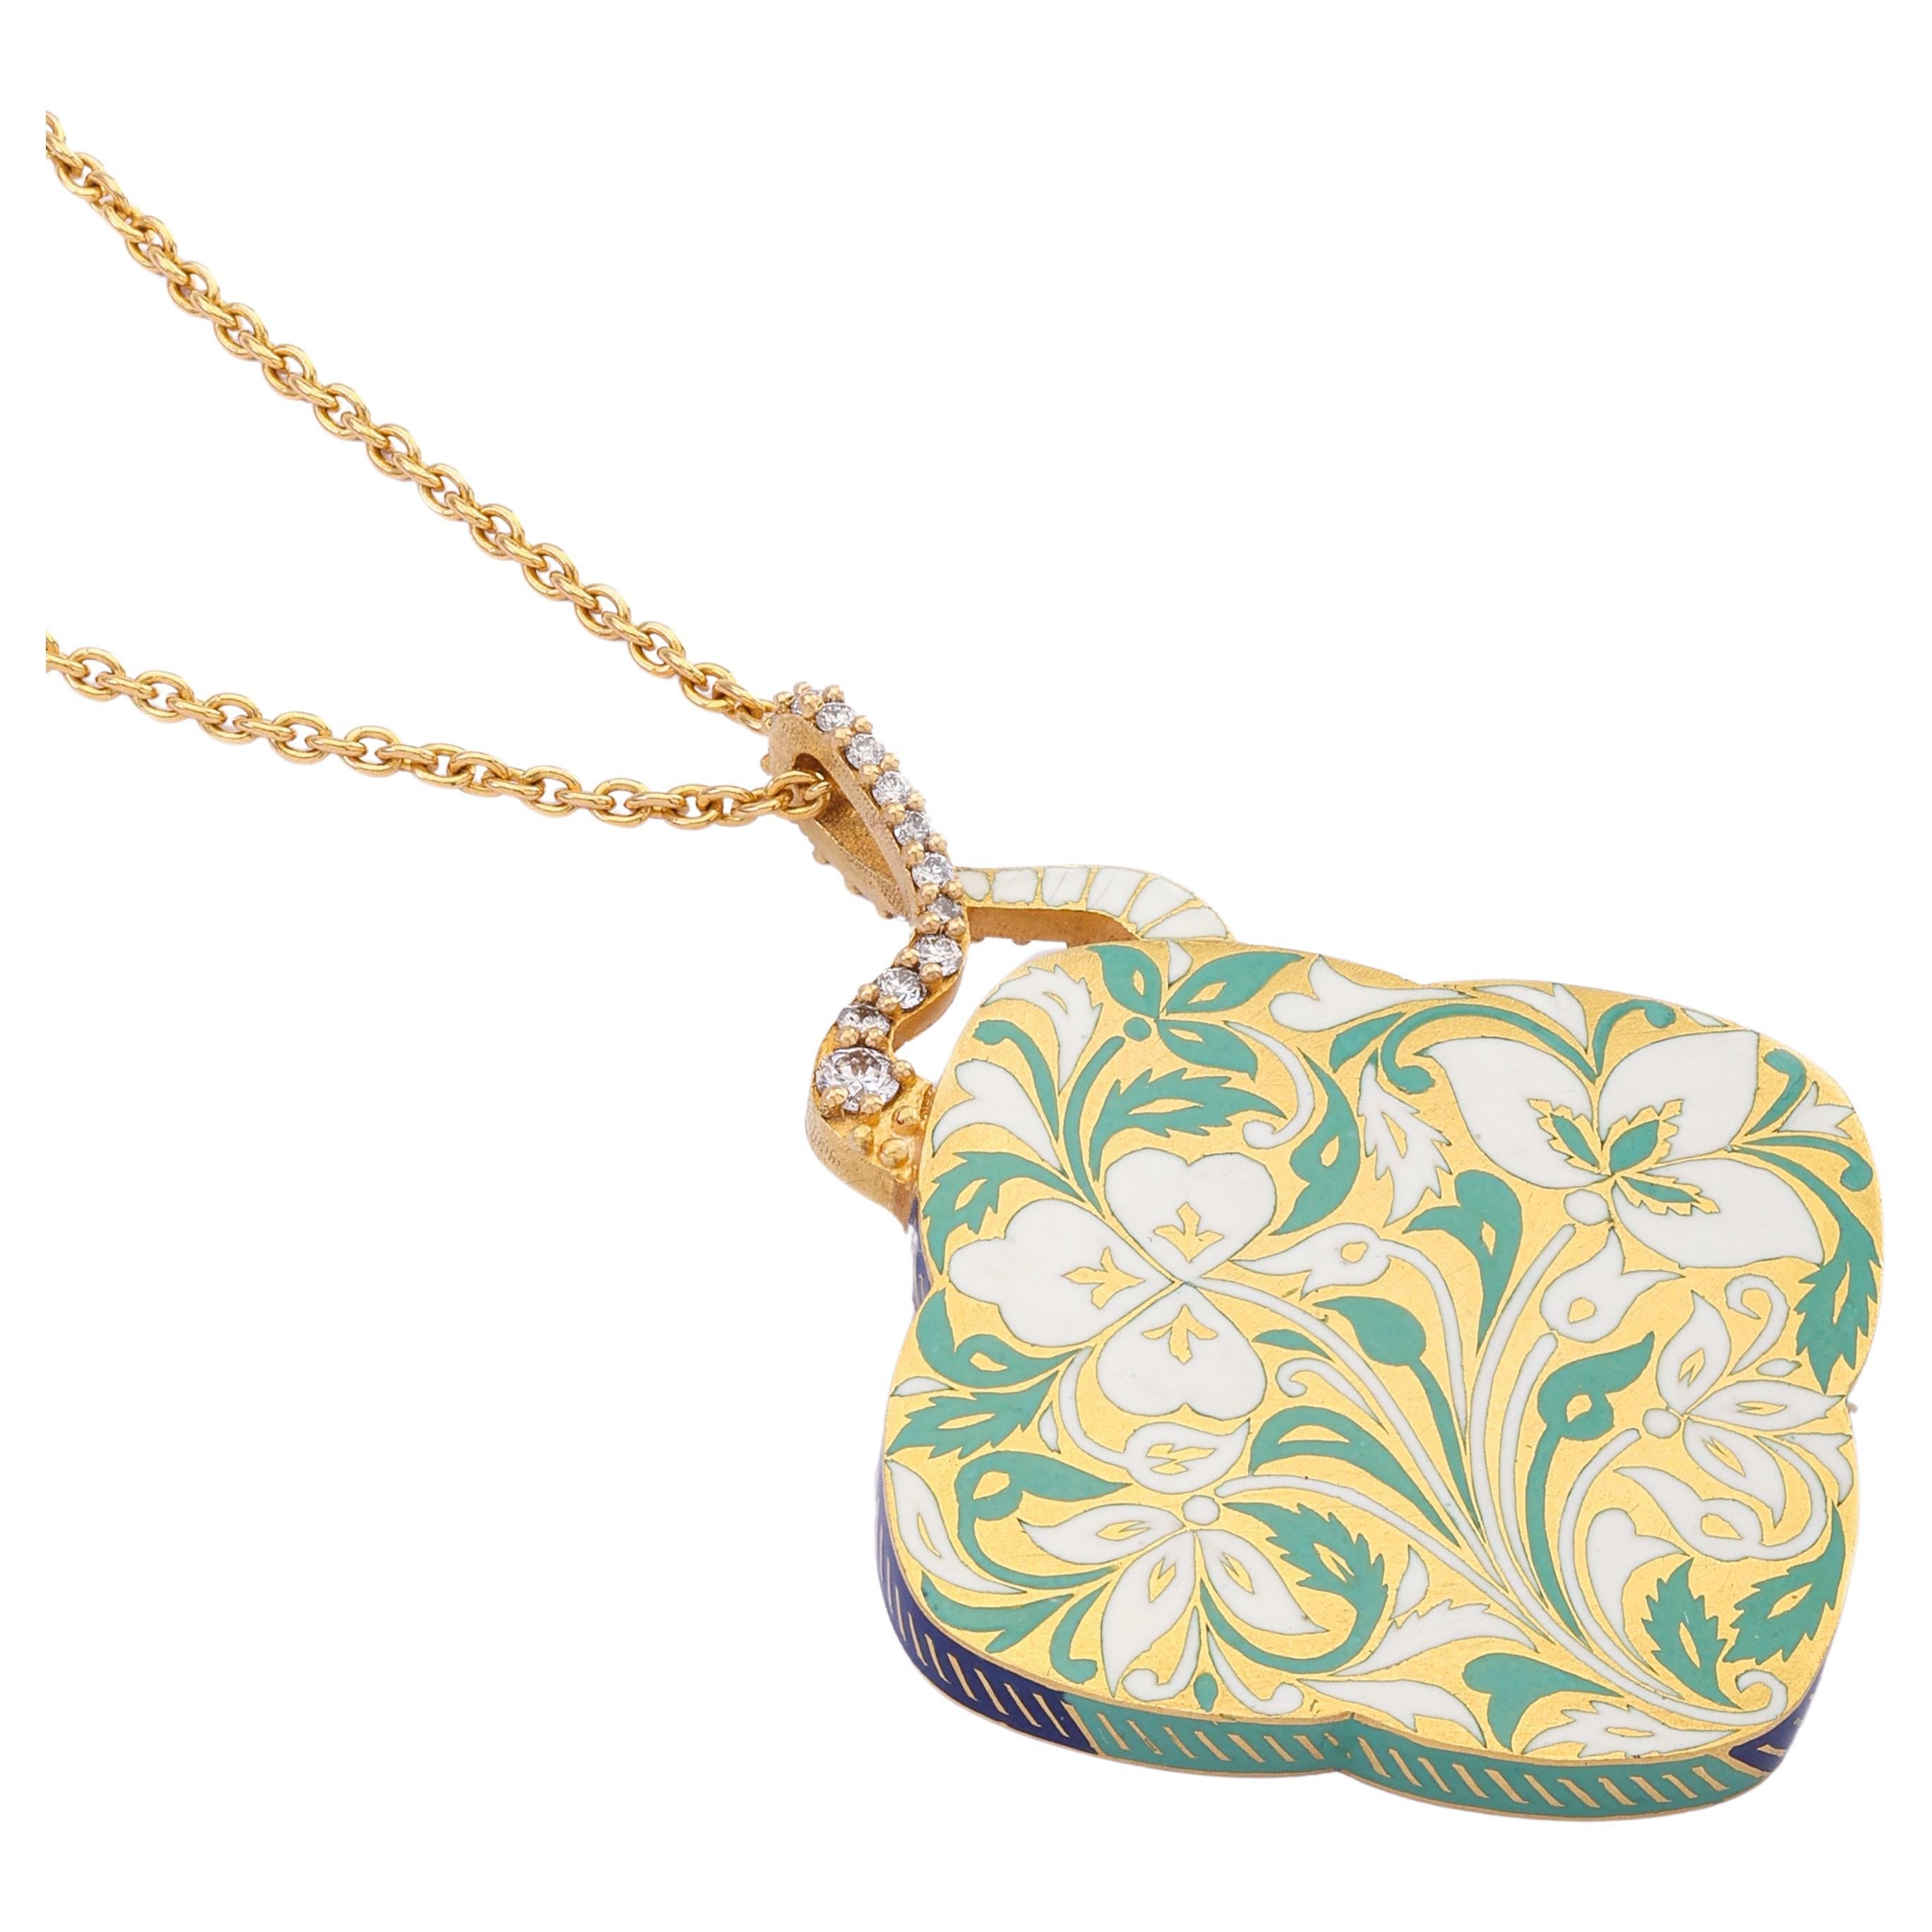 22k Gold Handmade Blue and Green Floral Enamel Pendant Necklace by Agaro Jewels